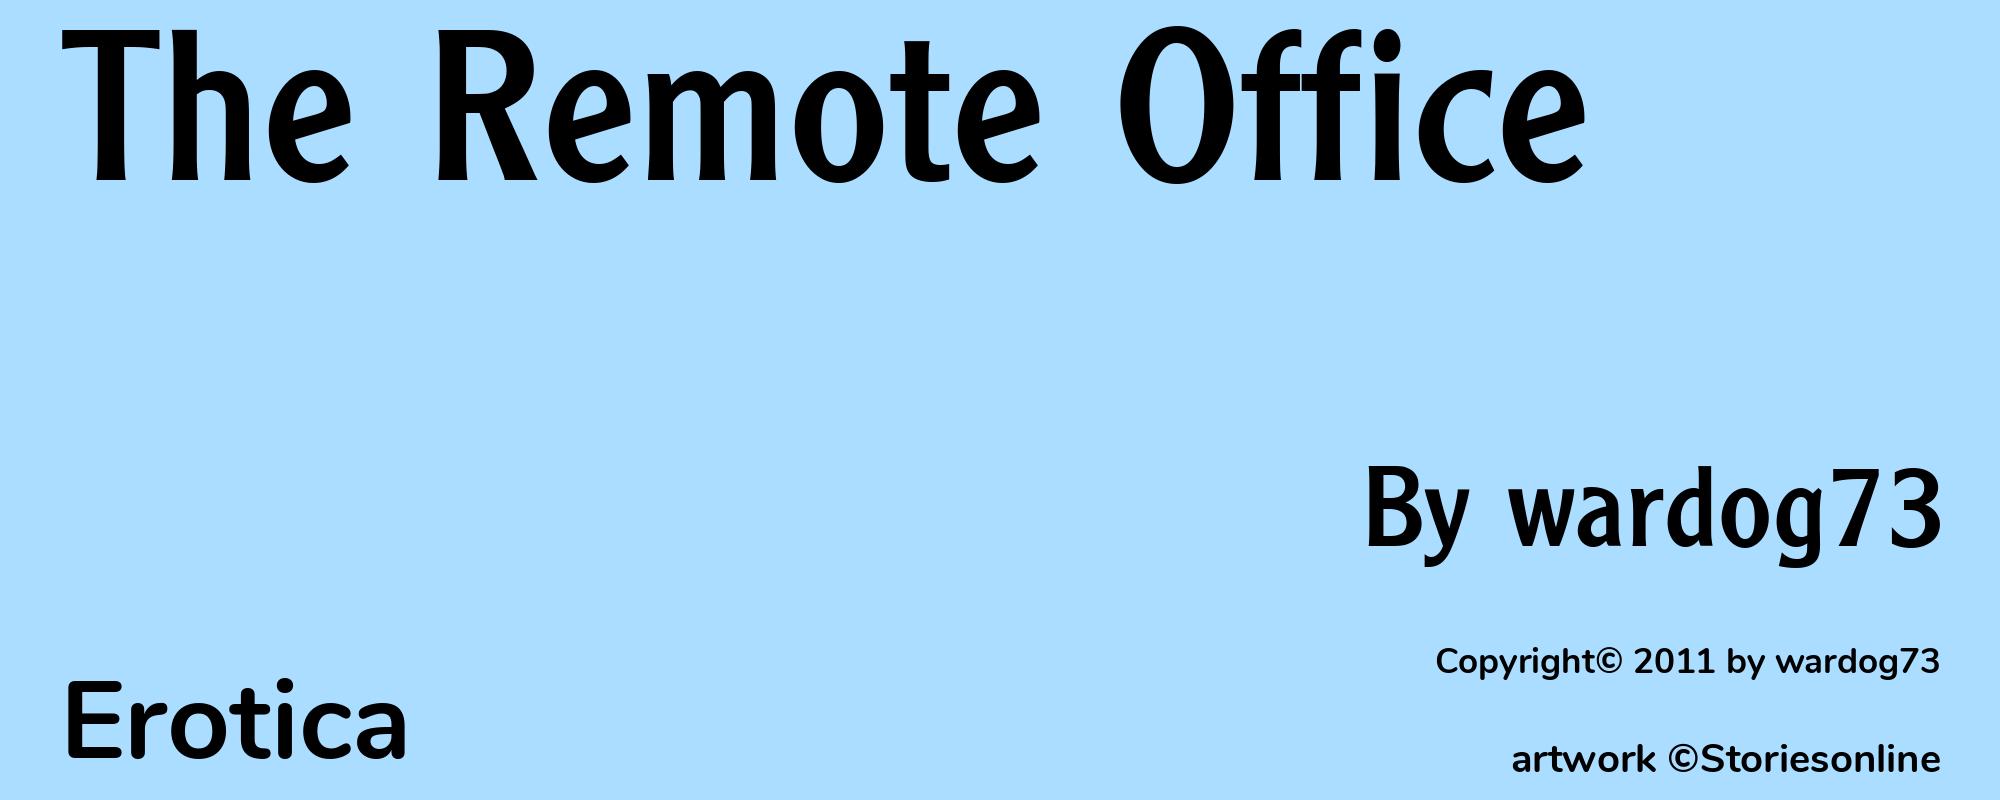 The Remote Office - Cover